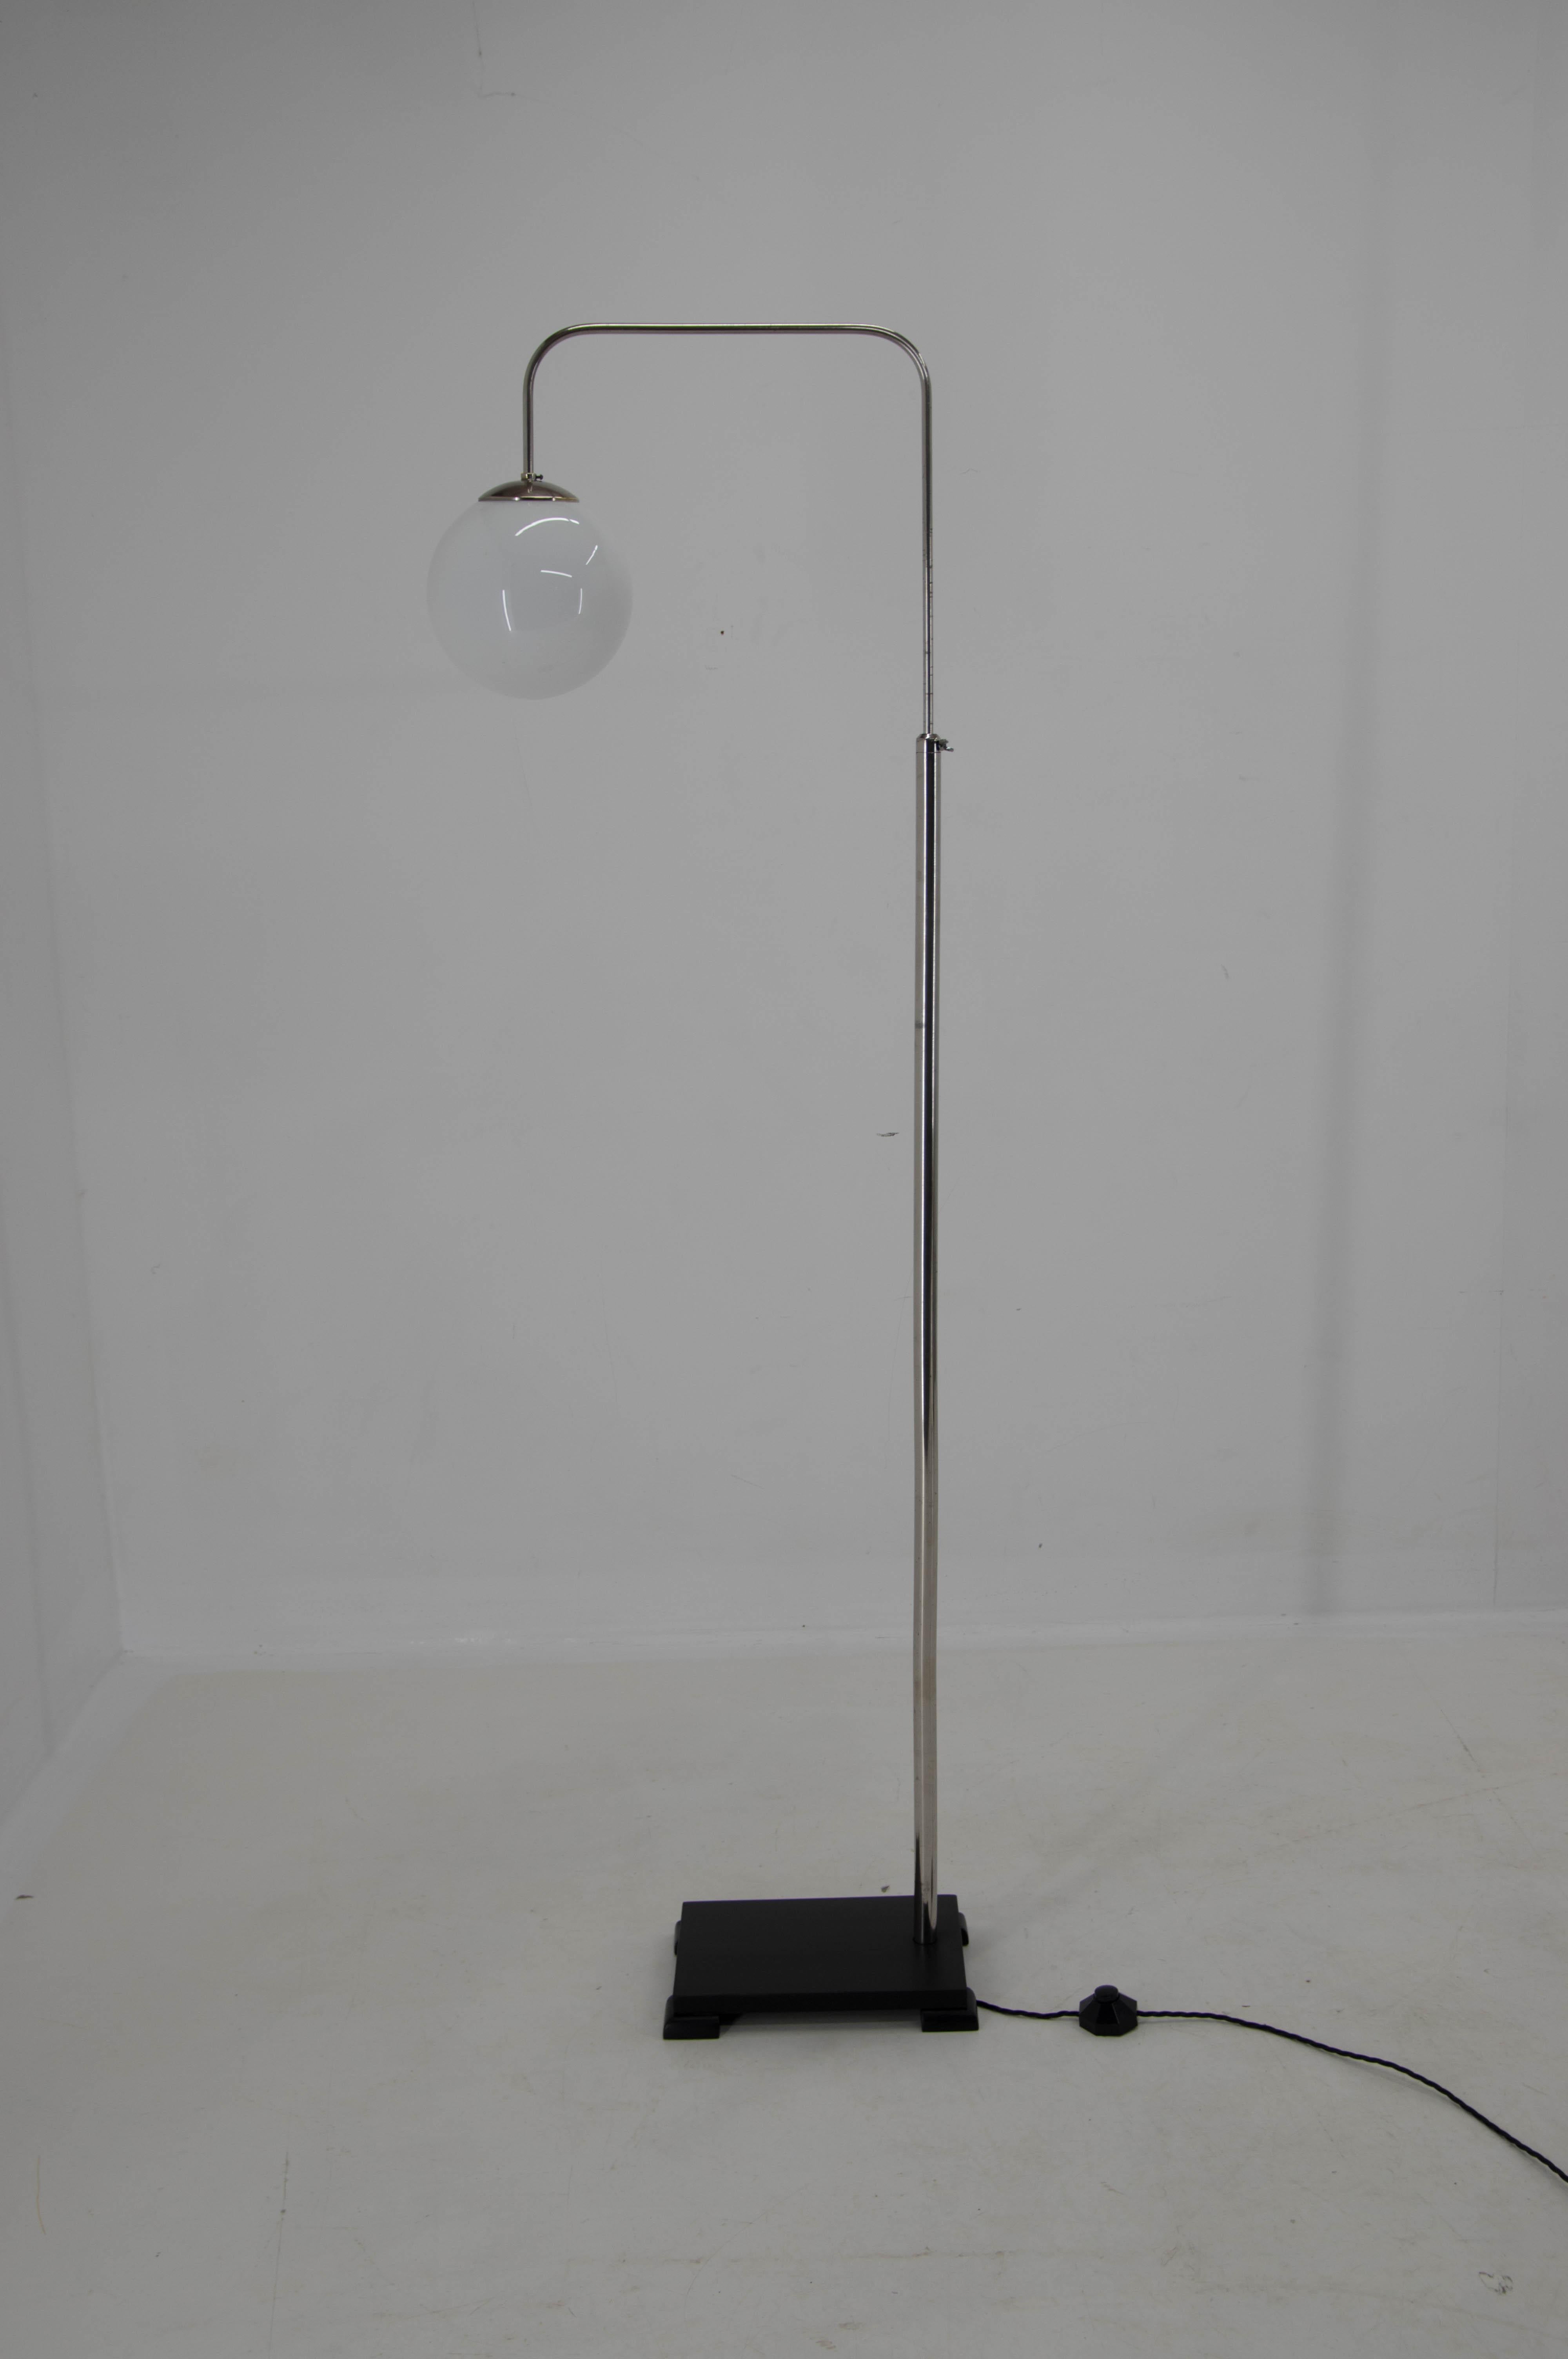 Simple and elegant functionalist floor lamp with adjustable height - min 140cm, max - 176cm. Wooden base refinished. Nickel-plated stand with age patina - polished. Opaline glass shade. Rewired: 1x60W, E25-E27 bulb. Original switch.
US plug adapter